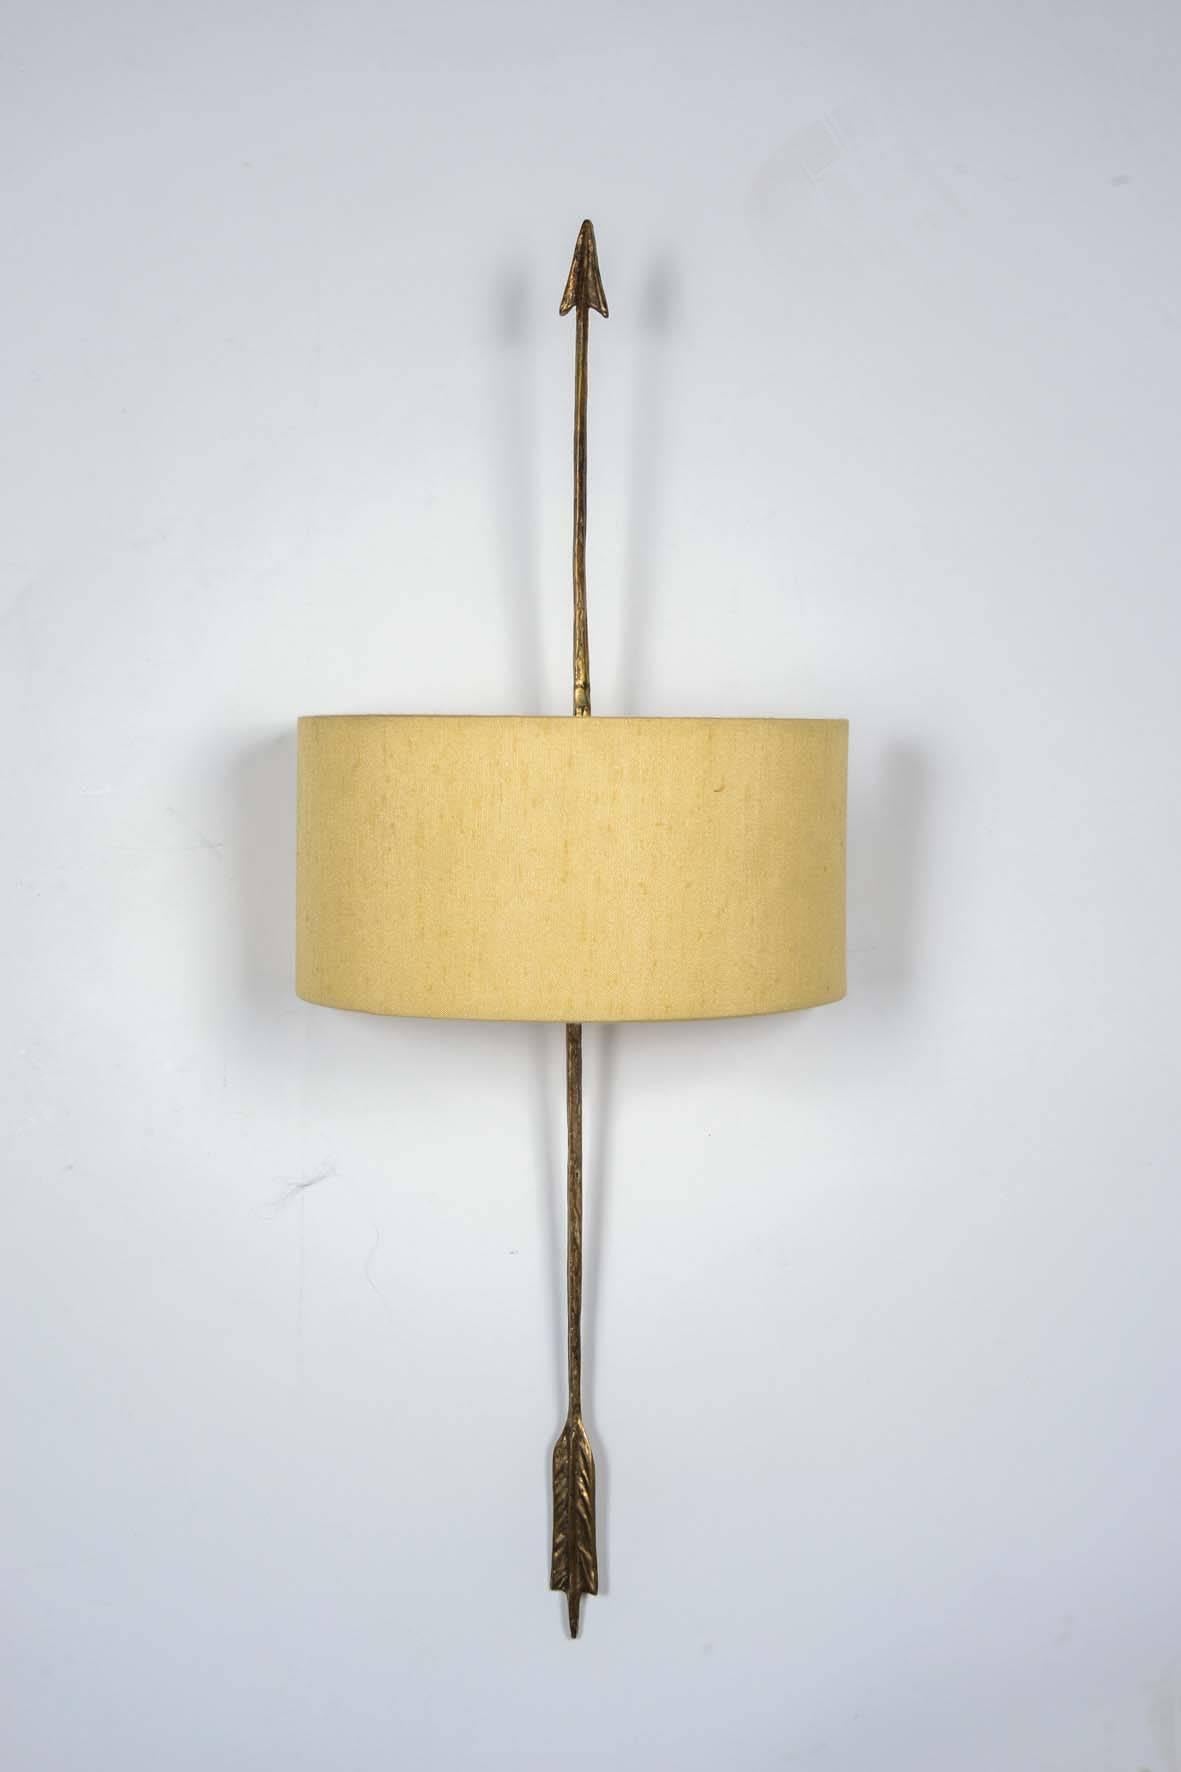 Set of four bronze sconces in the style of Agostini, one bulb per sconce.
Lamp shade in the genuine ecru fabric.